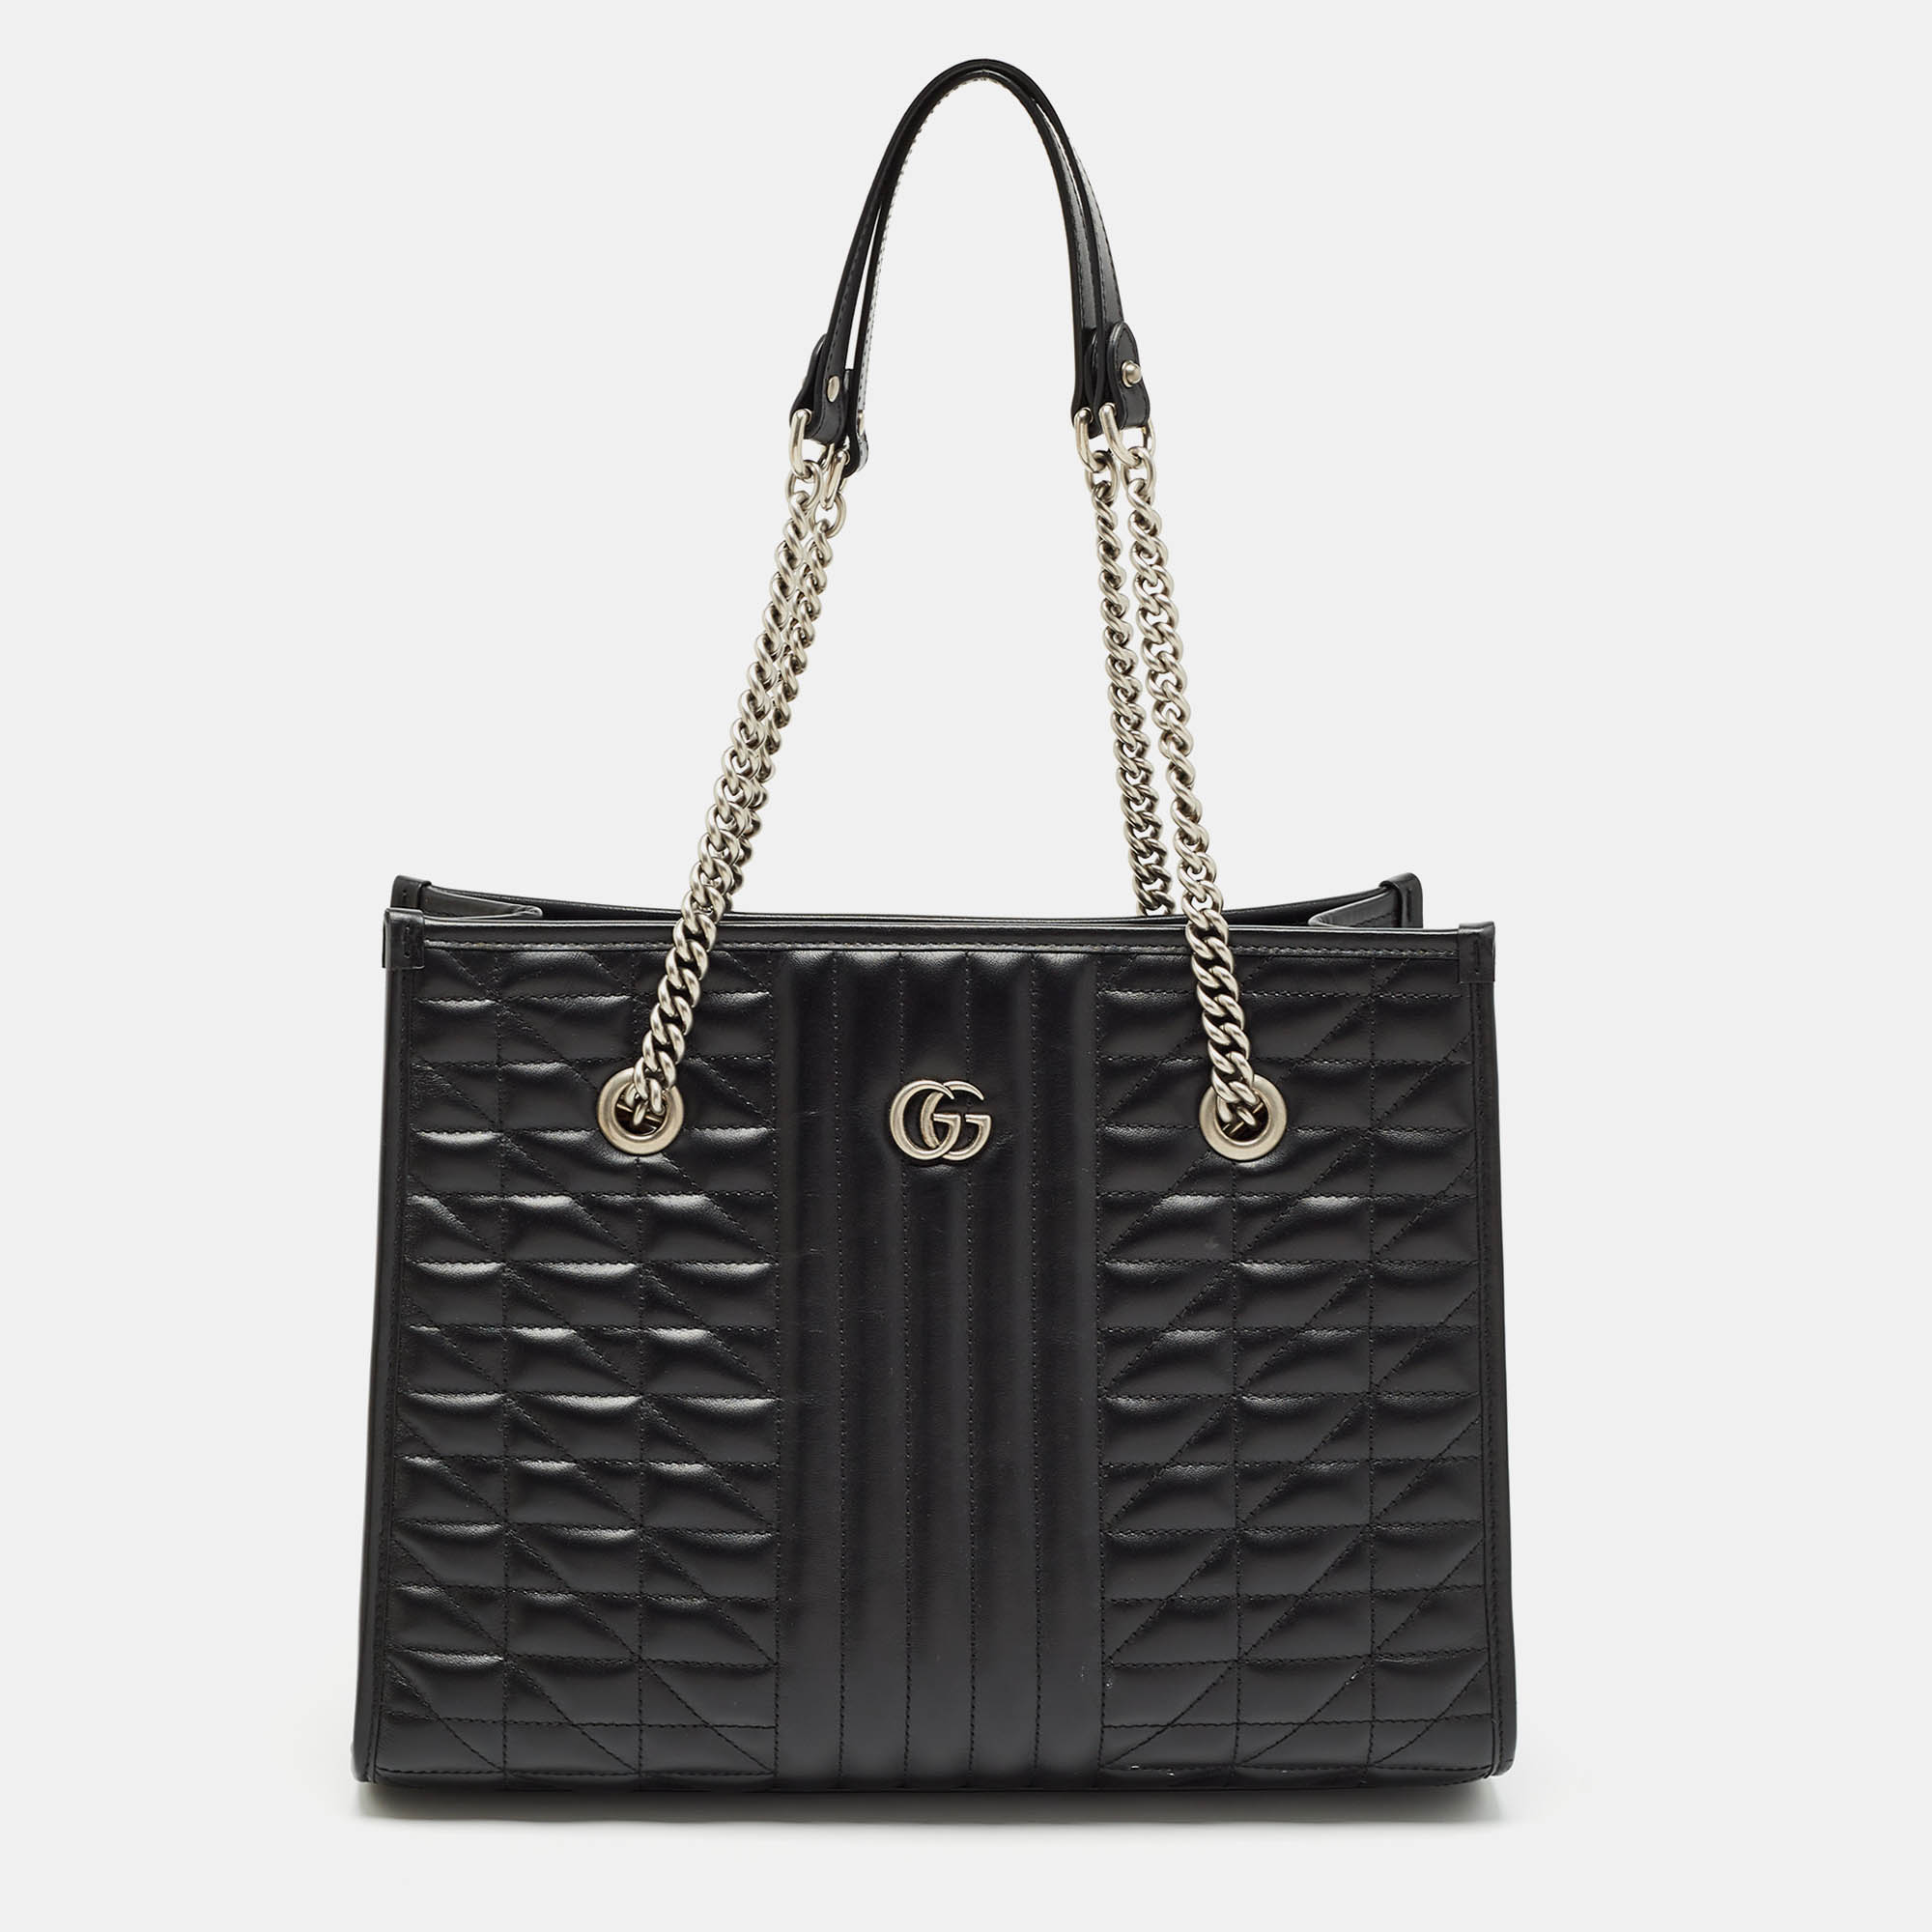 Created from high quality materials this Gucci tote is enriched with functional and classic elements. It can be carried around conveniently and its interior is perfectly sized to keep your belongings with ease.